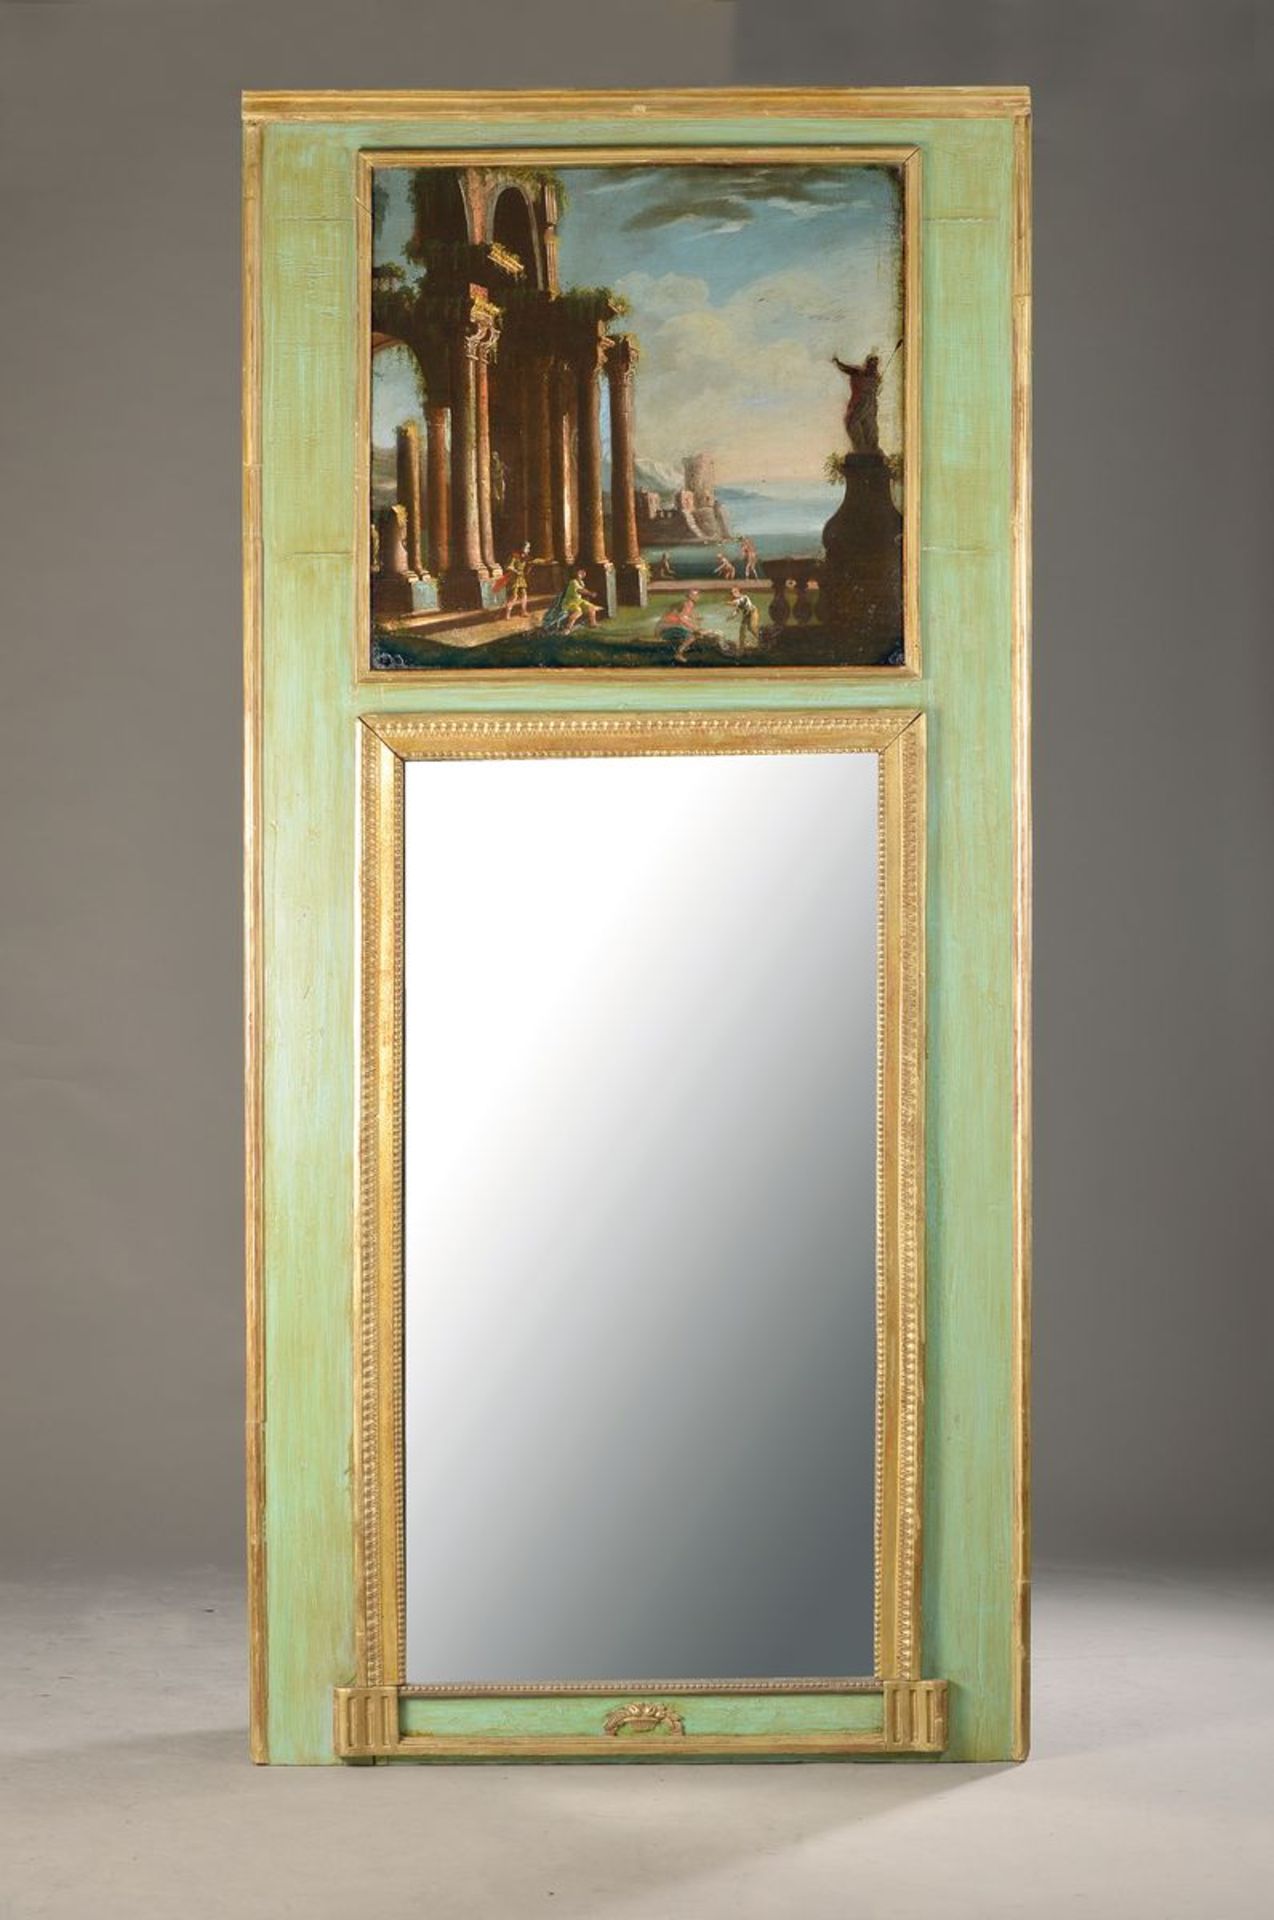 Trumeau/Mirror, France, around 1800, wooden frame green painted (painting secondary), in upper